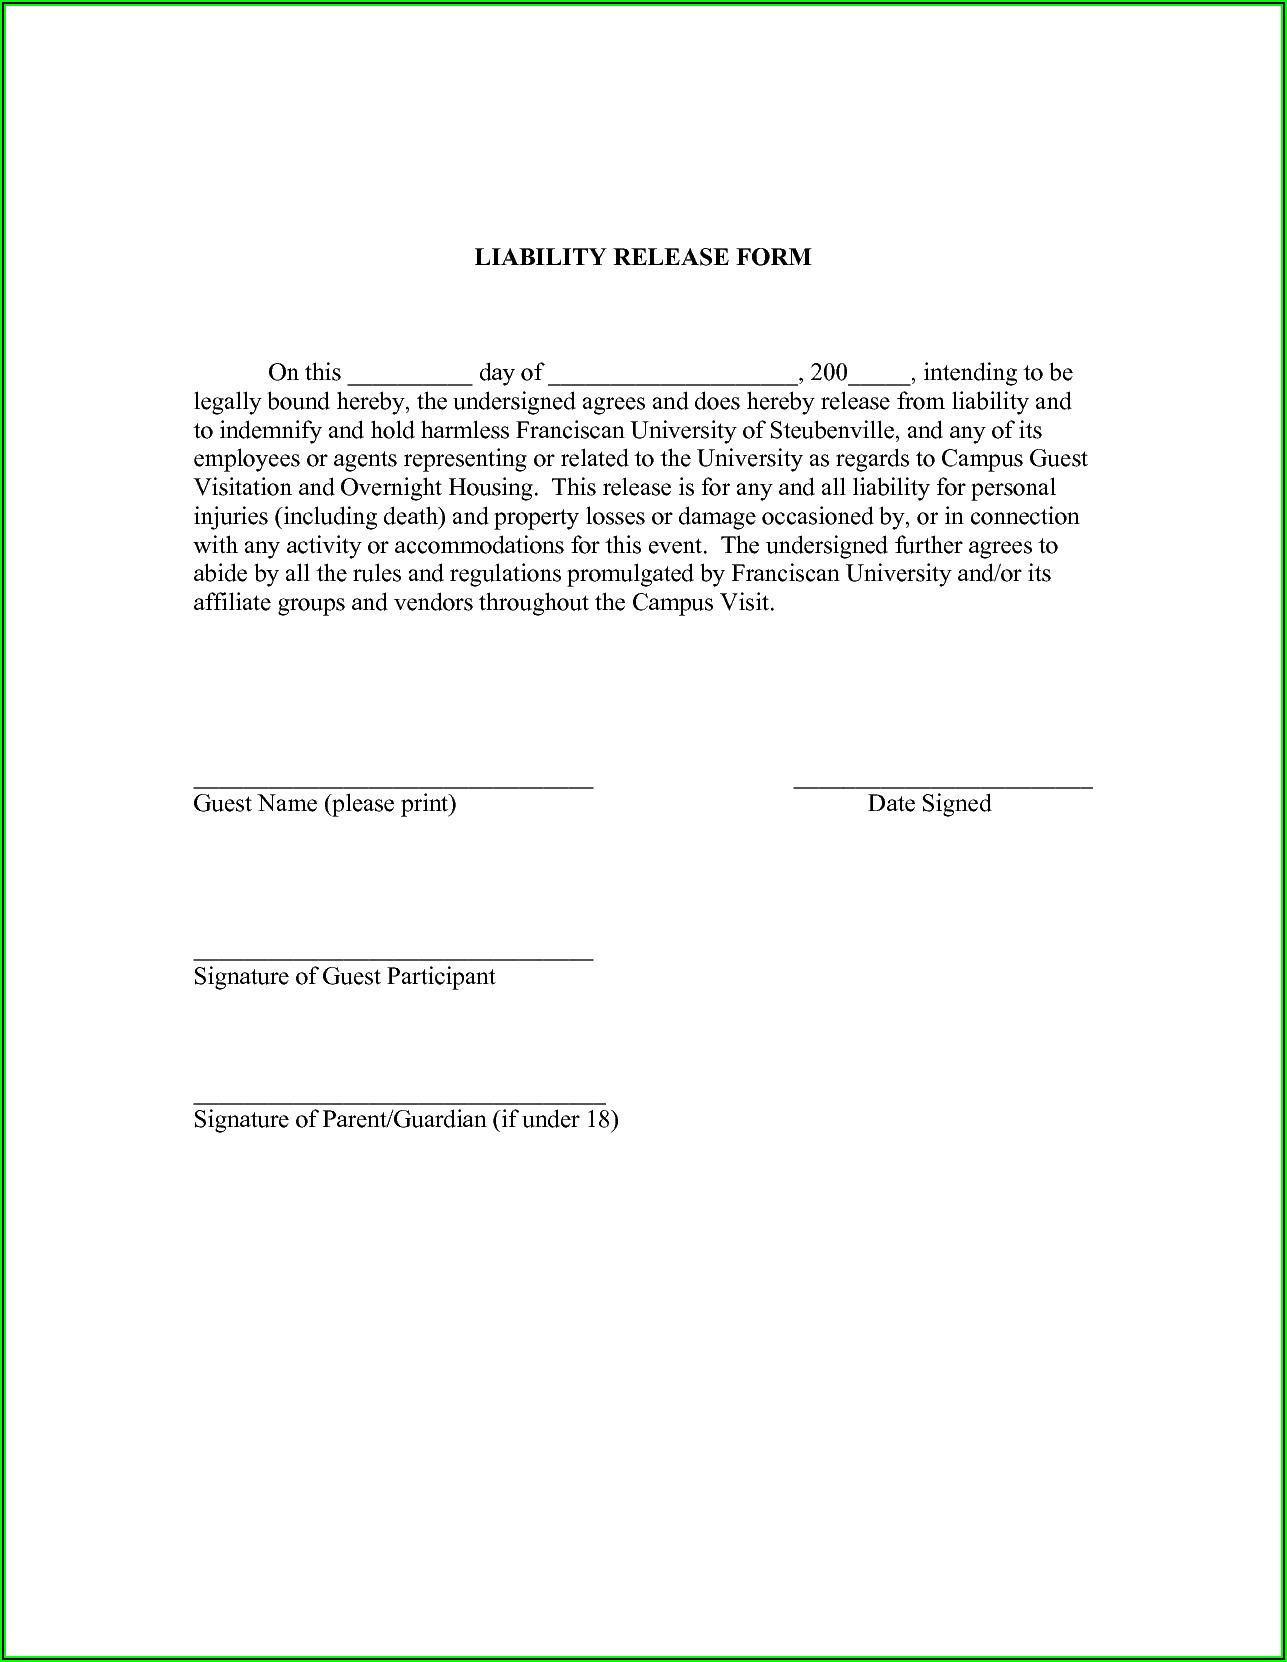 Liability Release Waiver Form